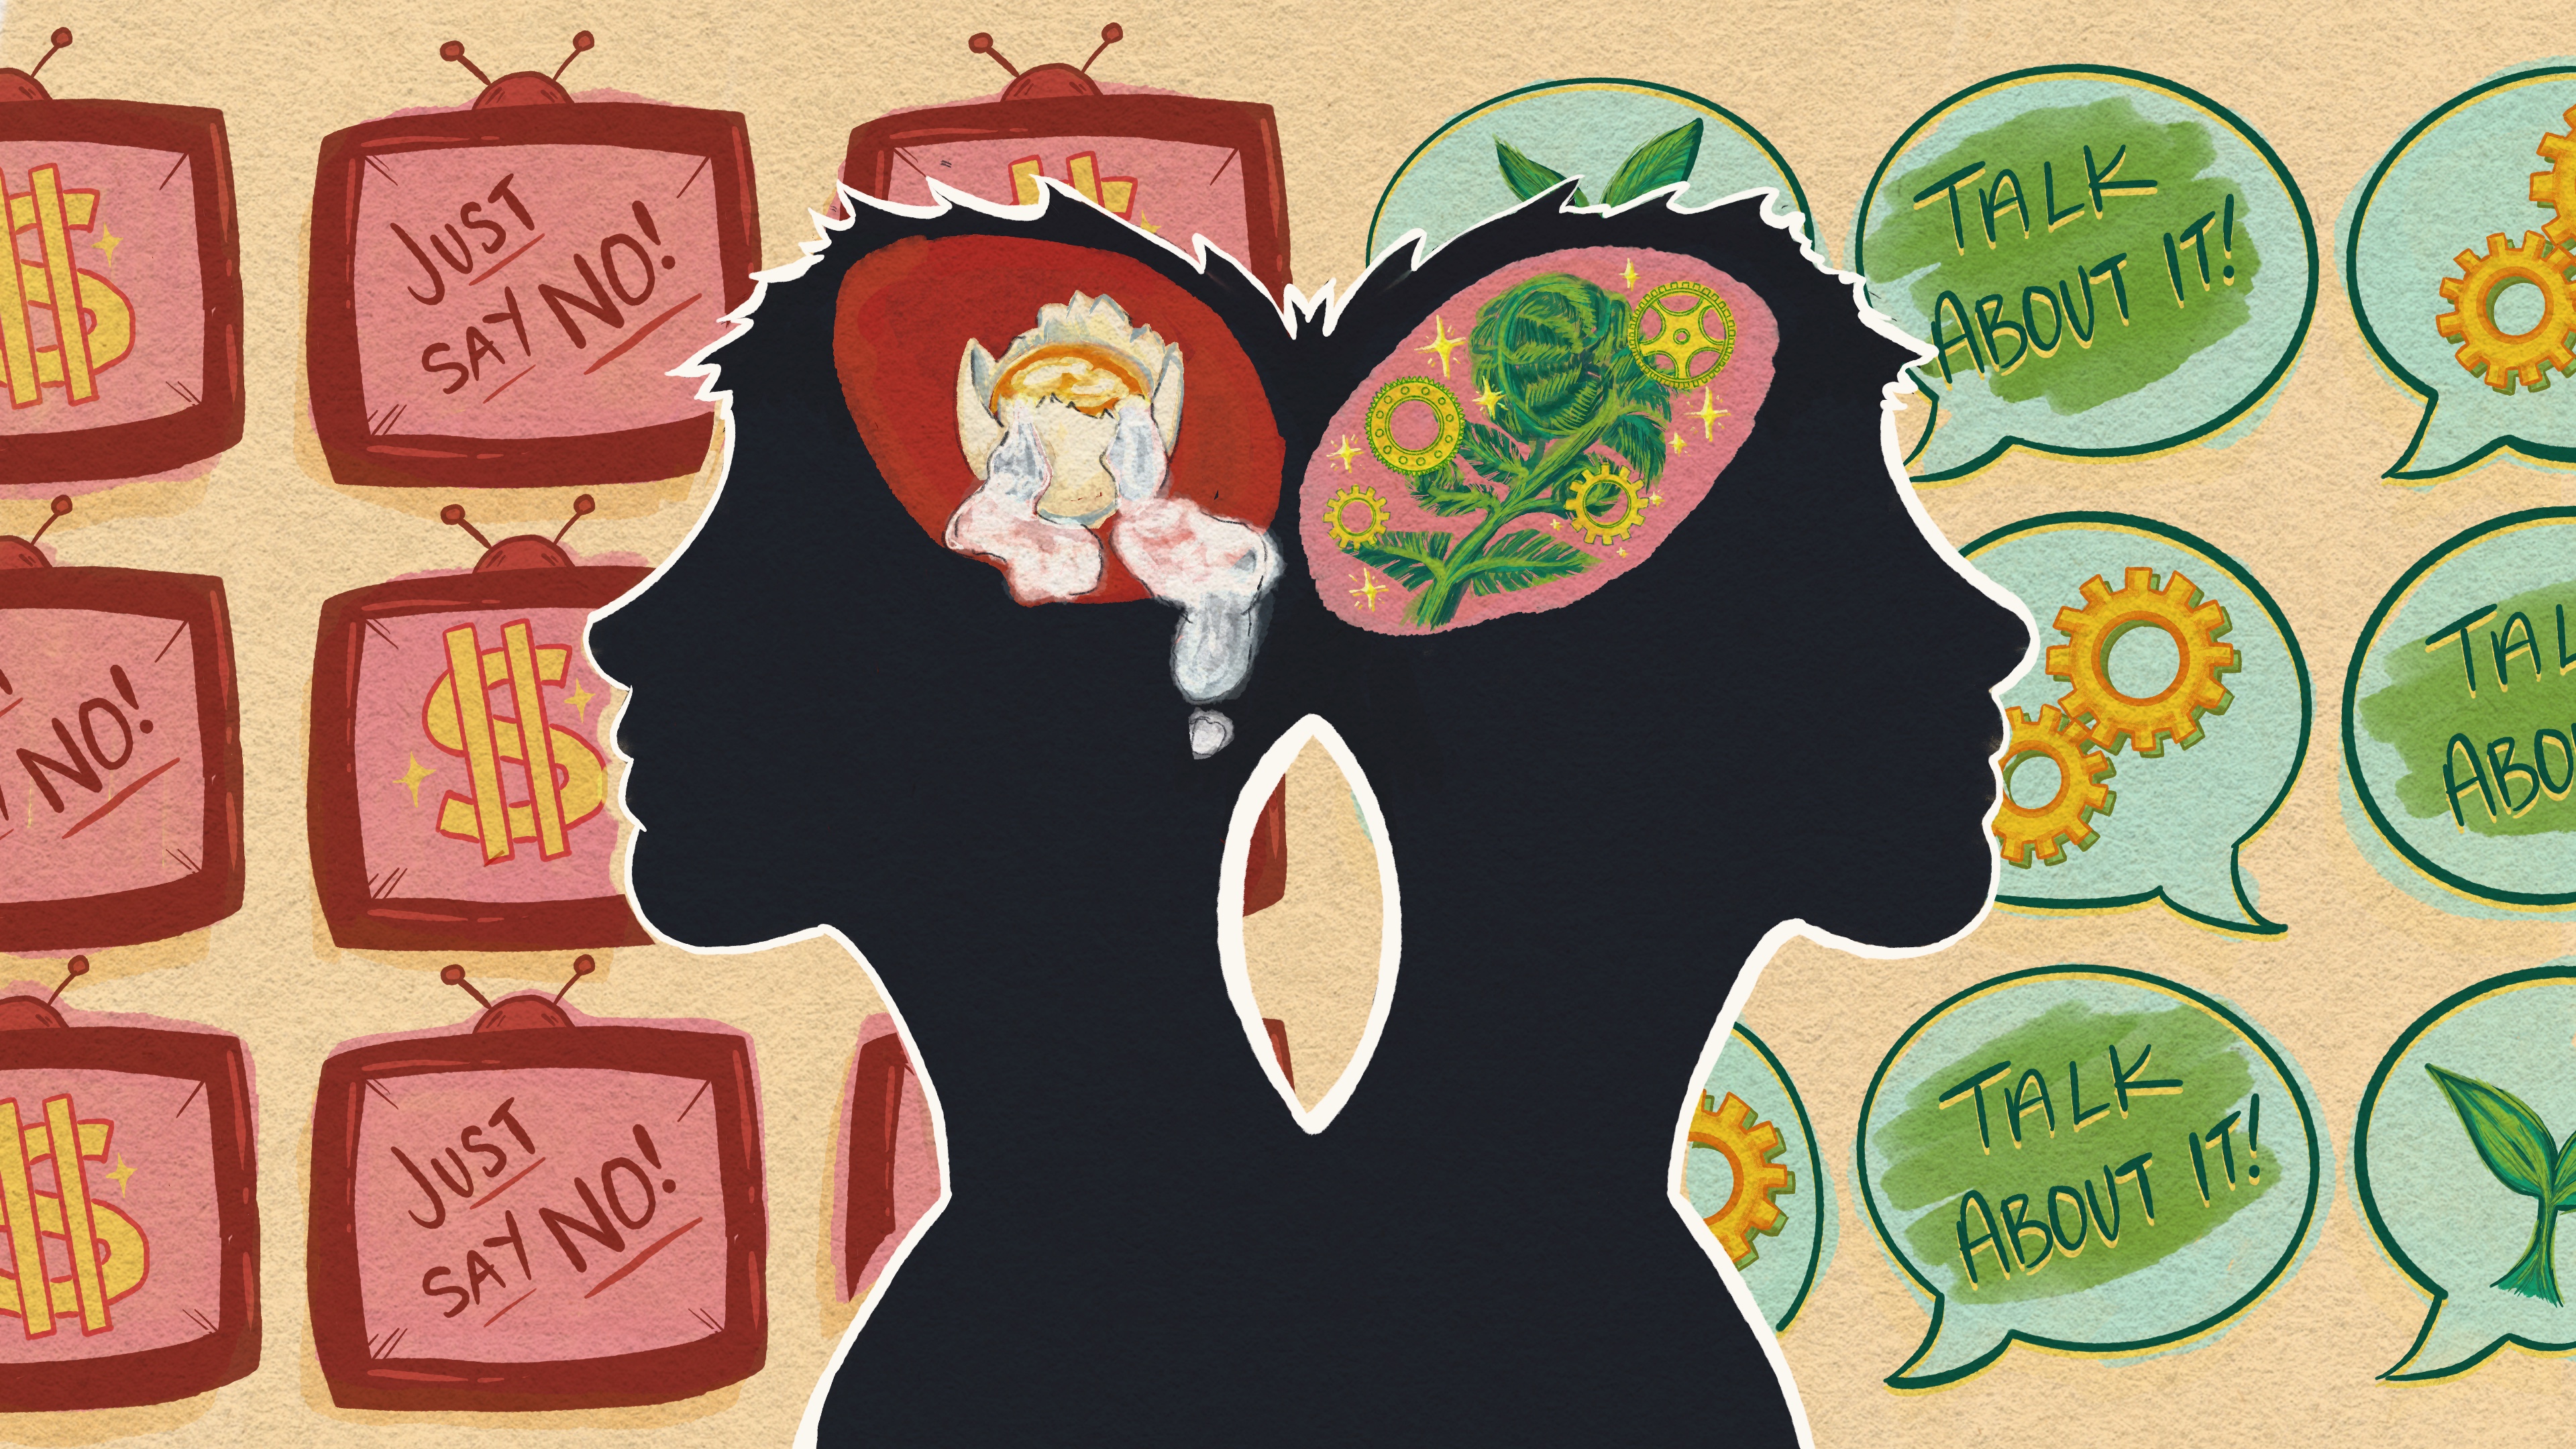 A digital illustration in colorful gouache shows silhouettes of the heads of two children facing in opposite directions. An outline of a brain is visible in each child’s head, with the one on the viewer’s left containing a cracked egg and the one on the right an unfurling fern. The background on the viewer’s left shows an array of TV screens with alternating displays, one reading “Just say no!” and the other featuring a large “$” sign. The child on the viewer’s right faces a pattern of speech bubbles that either say “Talk about it!” or feature a pair of gears or a sprouting leaf.